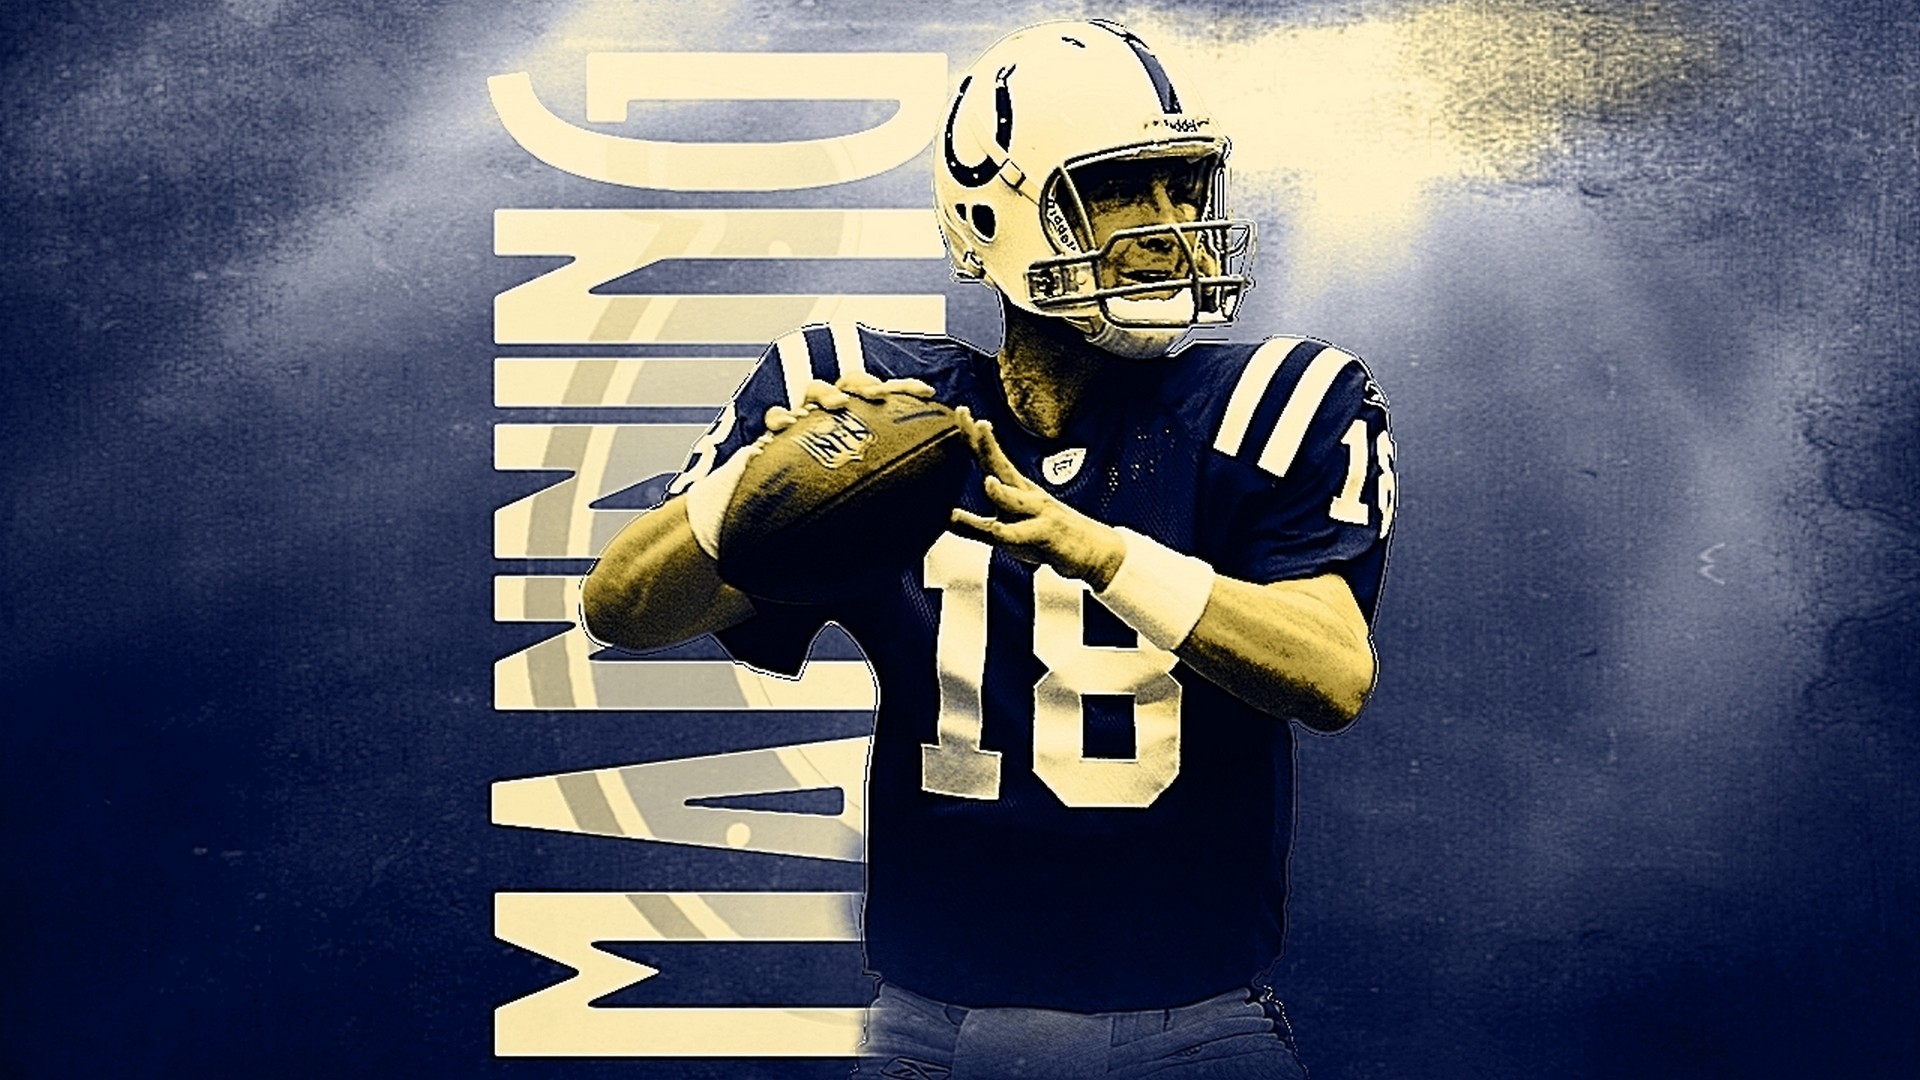 Peyton Manning Indianapolis Colts Wallpaper HD with high-resolution 1920x1080 pixel. You can use this wallpaper for your Mac or Windows Desktop Background, iPhone, Android or Tablet and another Smartphone device